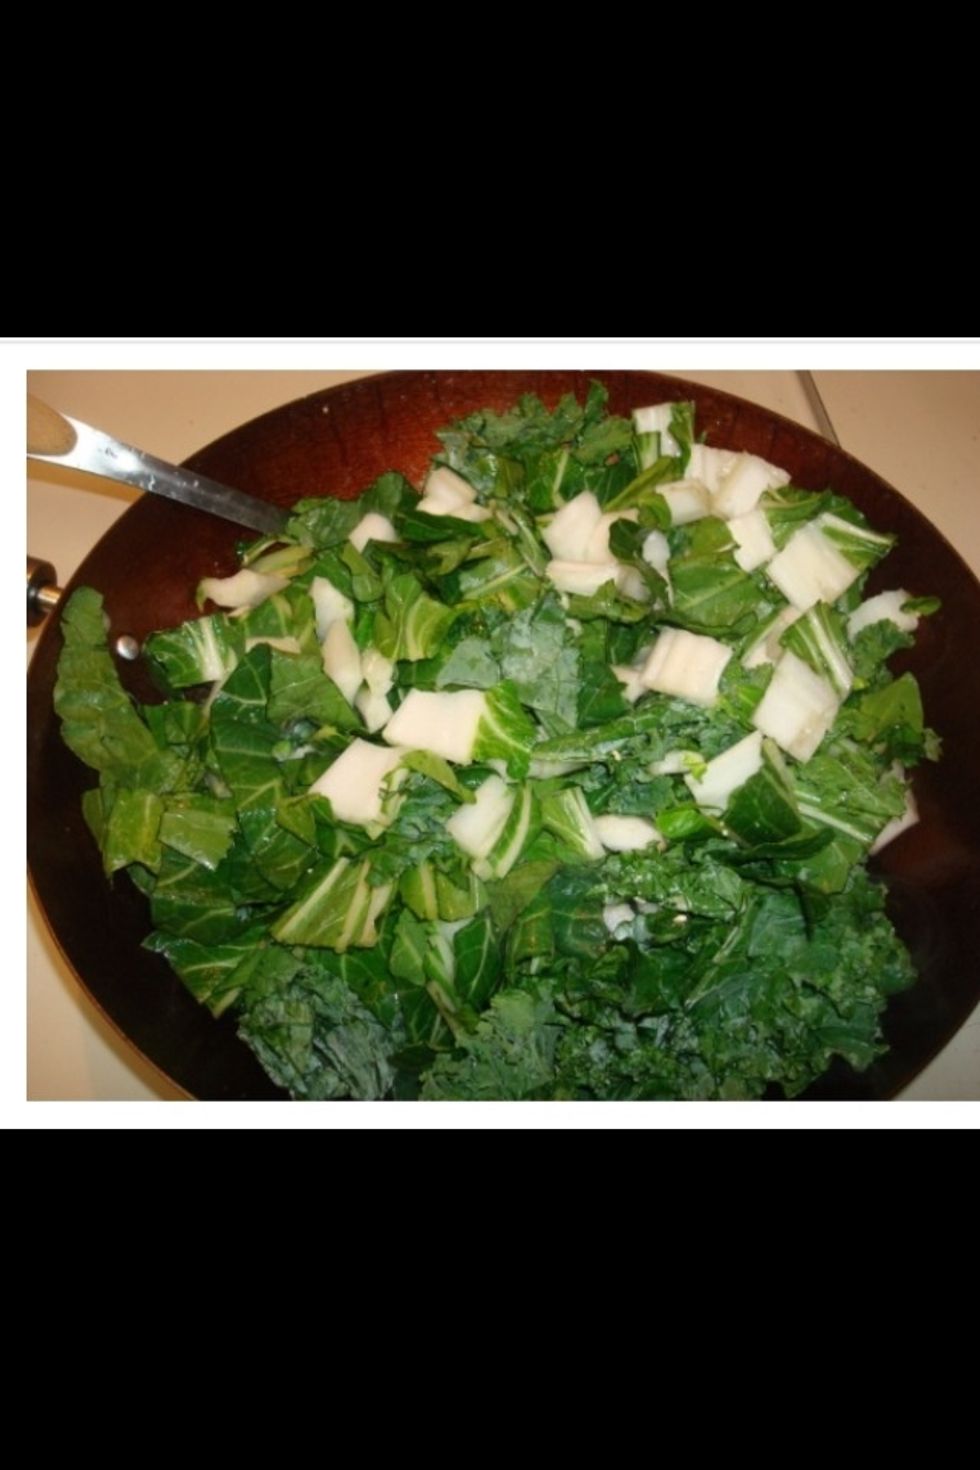 When the mushrooms have cooked, add your greens.  These will cook down substantially in a few minutes.